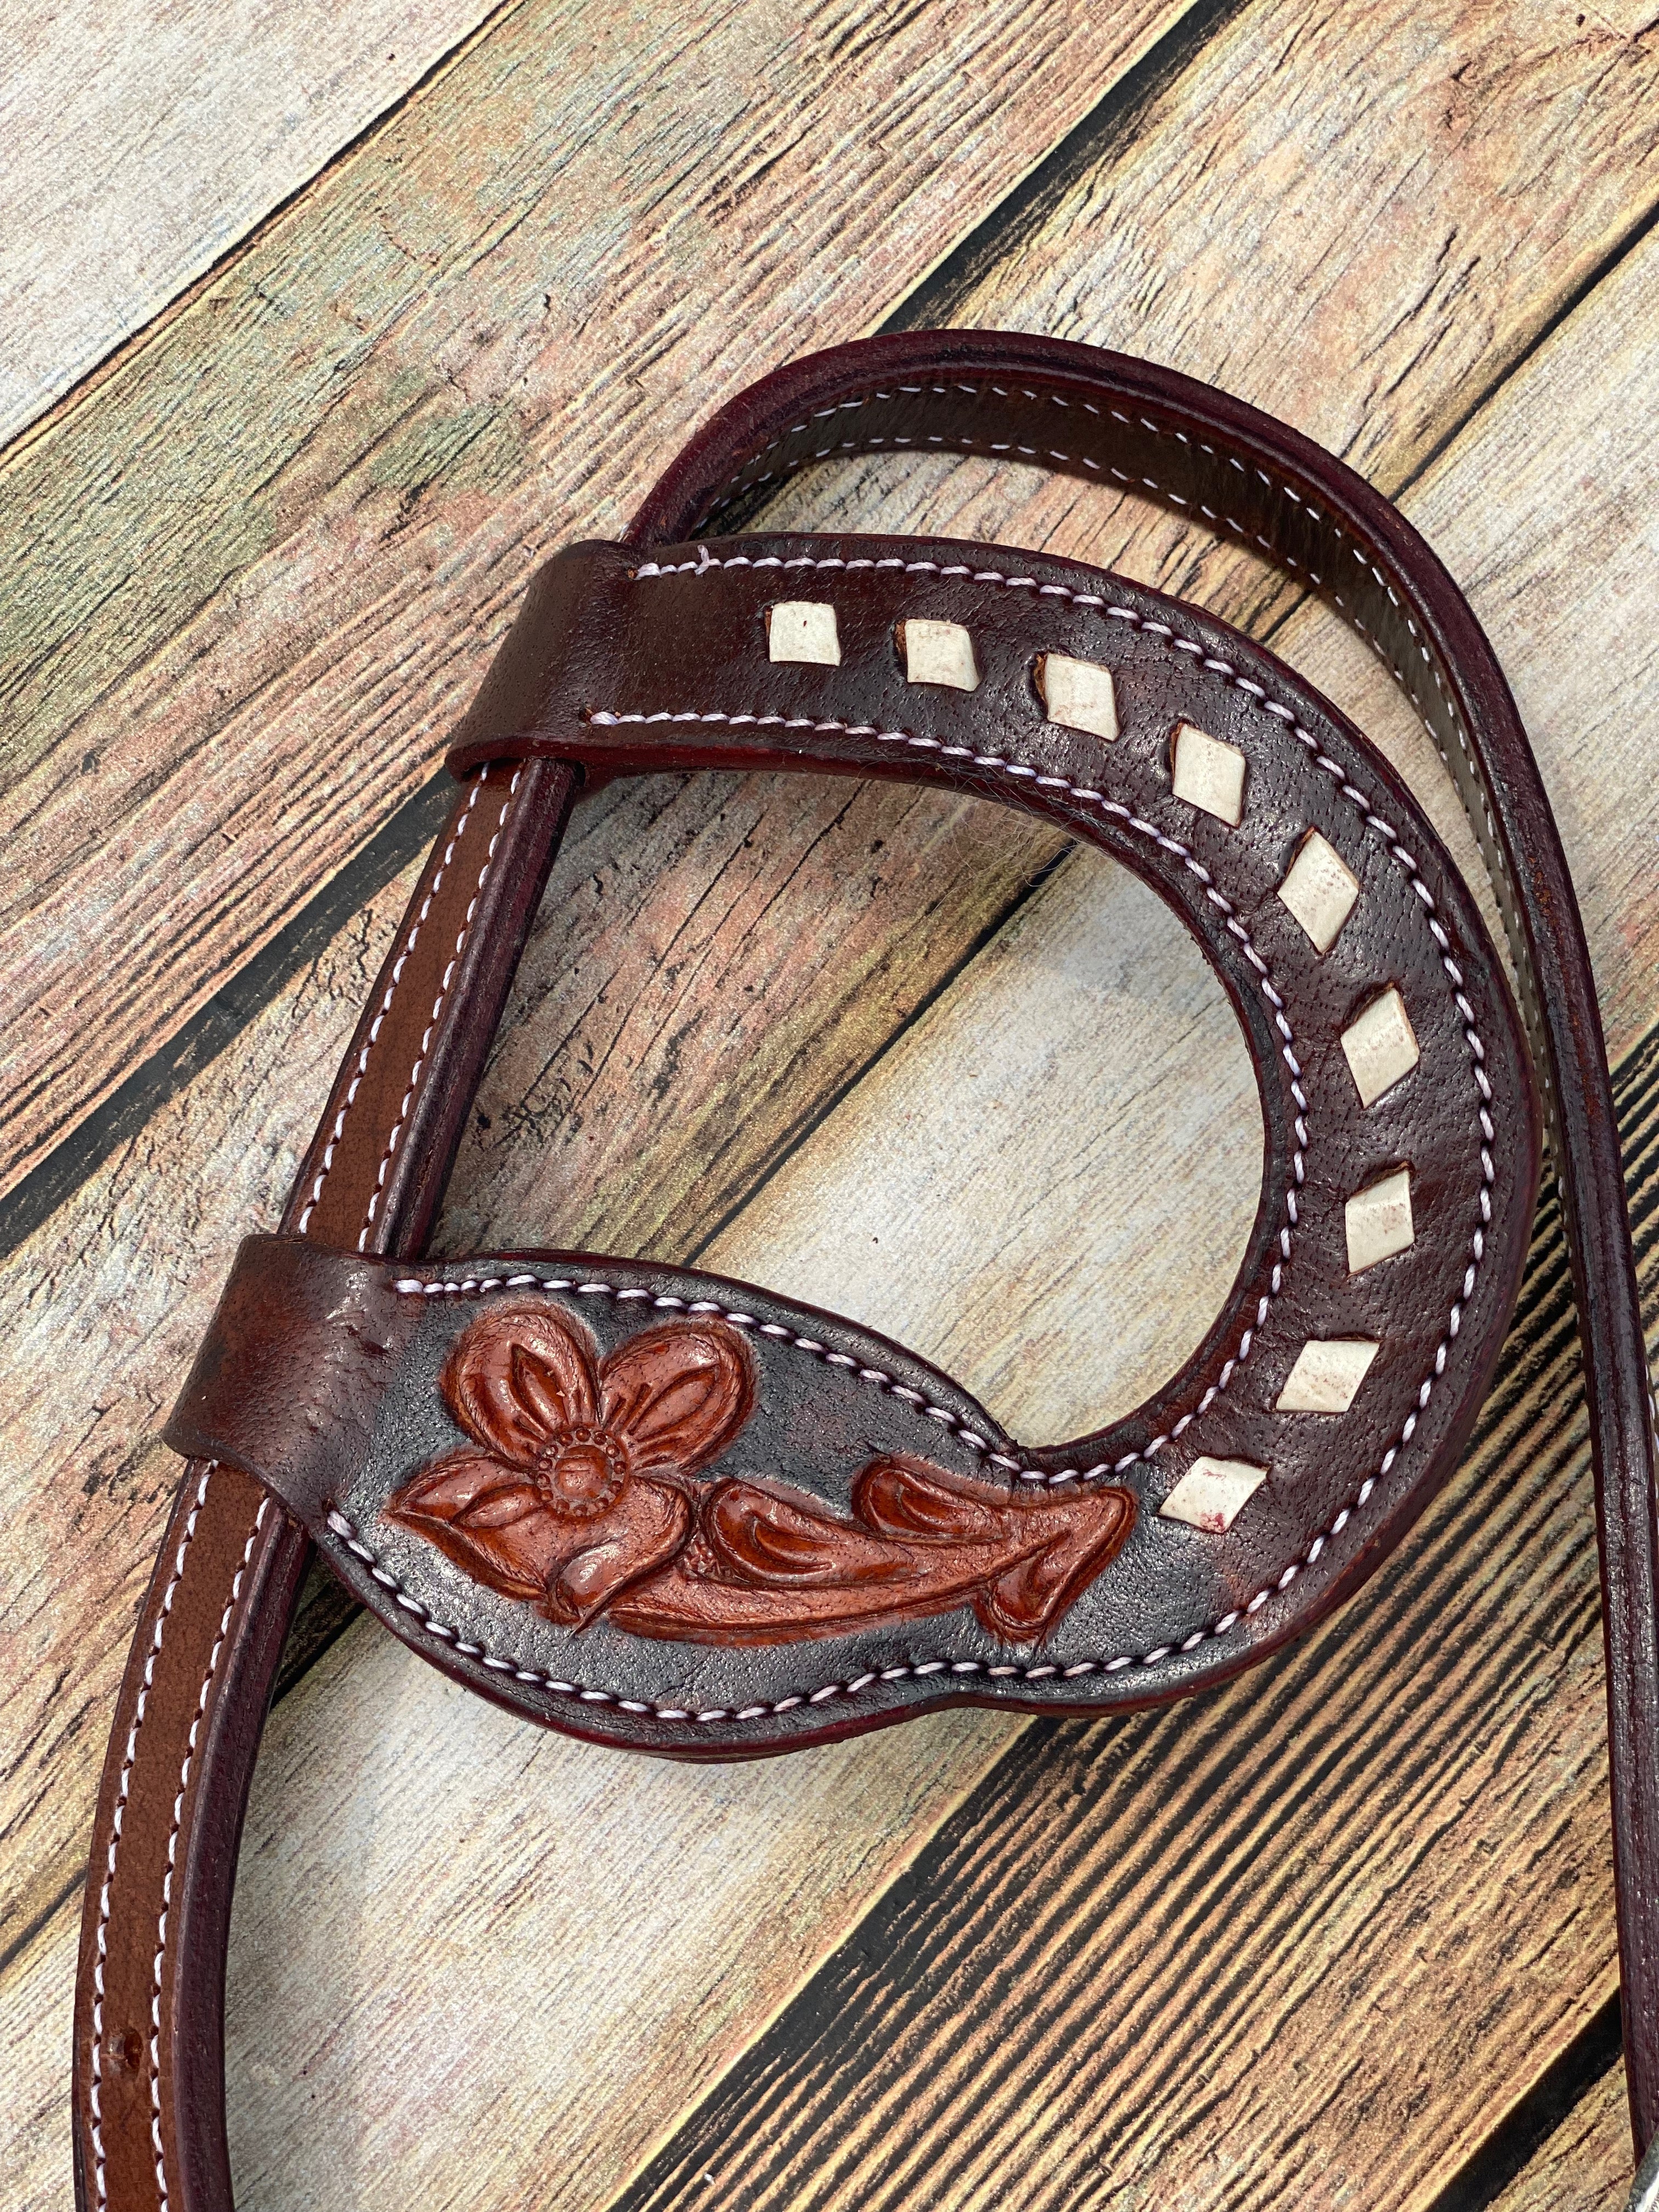 LV Tack sets black or dark brown leather – The Gritty Spur